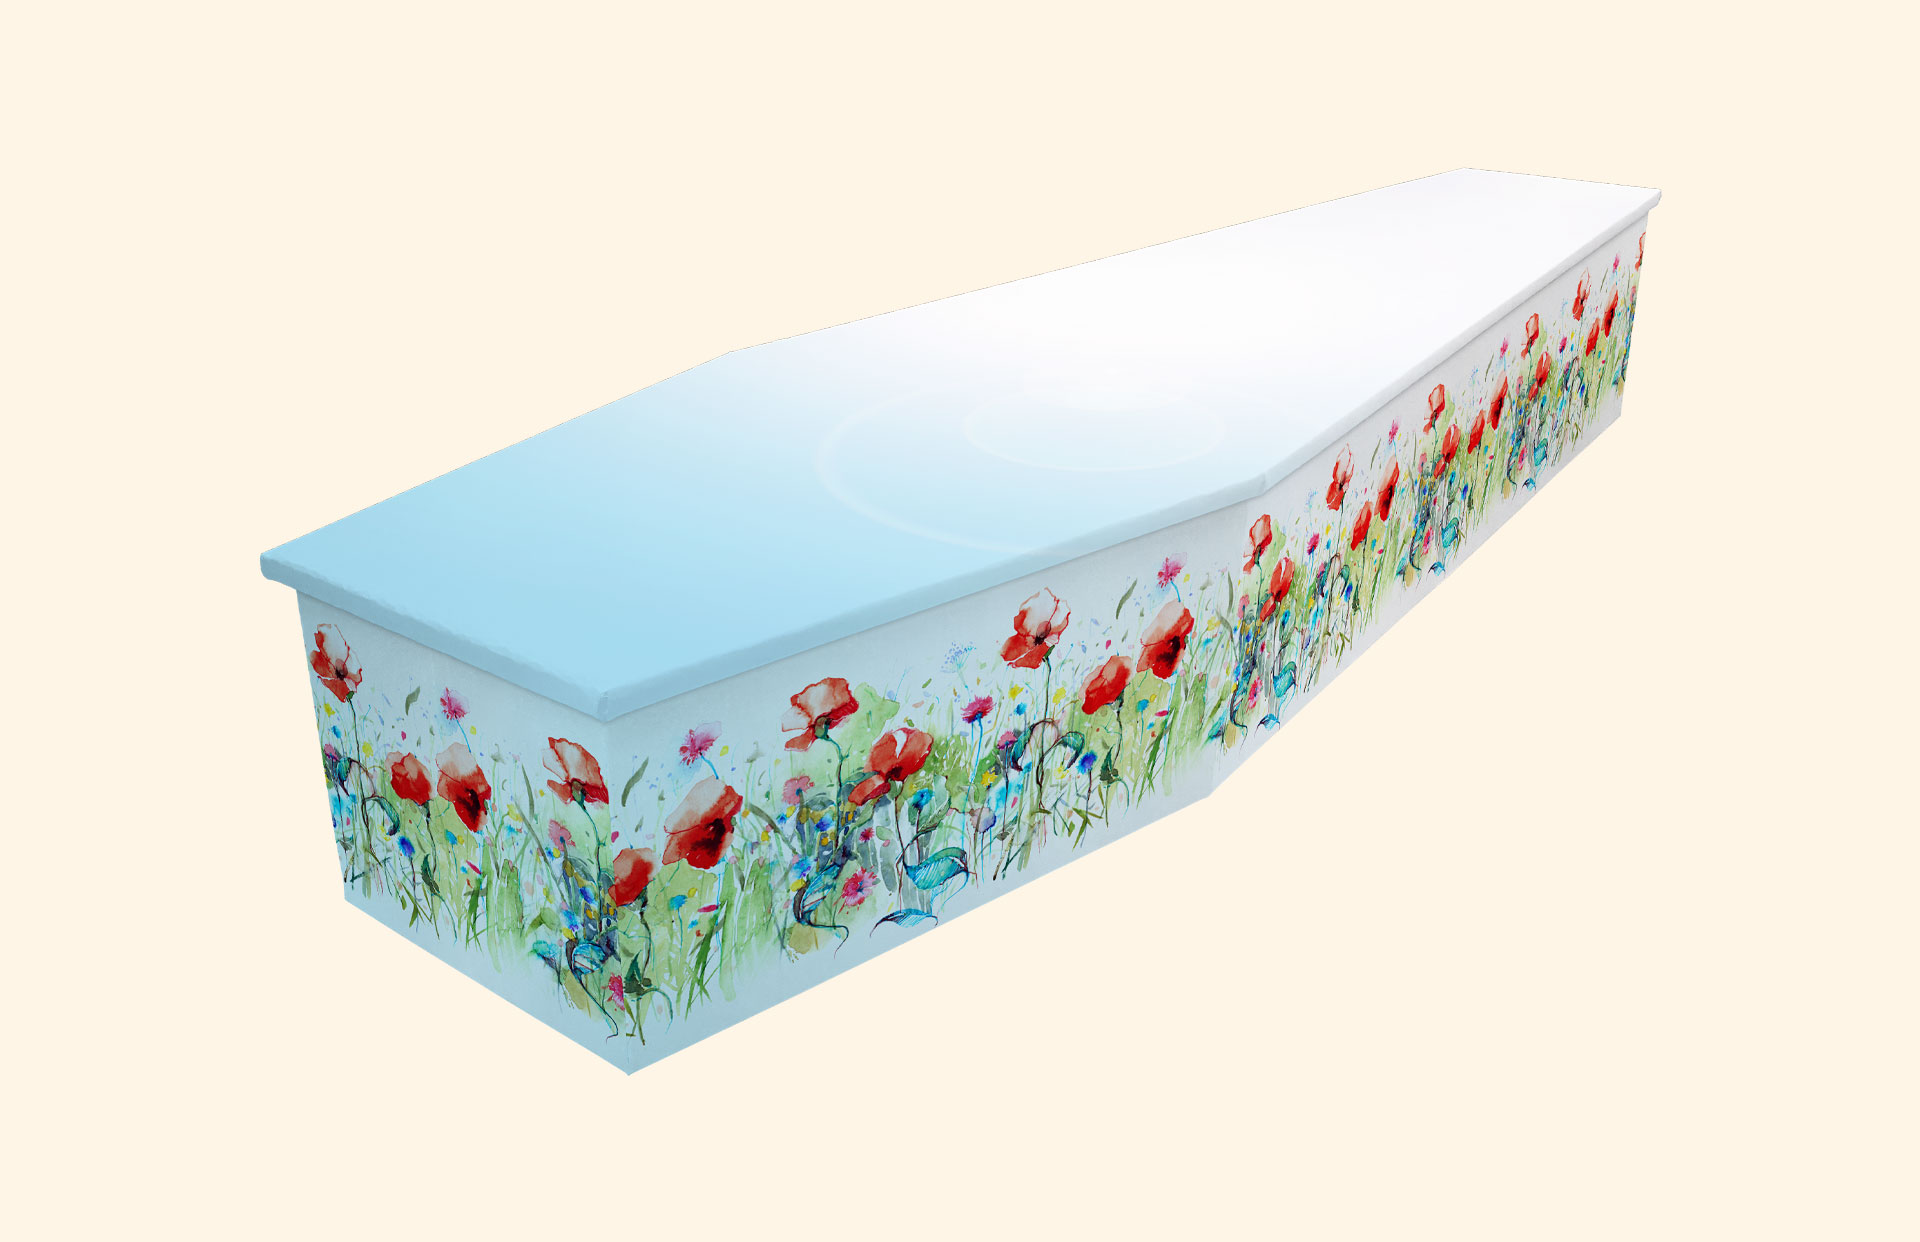 Watercolour Poppies in blue on a cardboard coffin